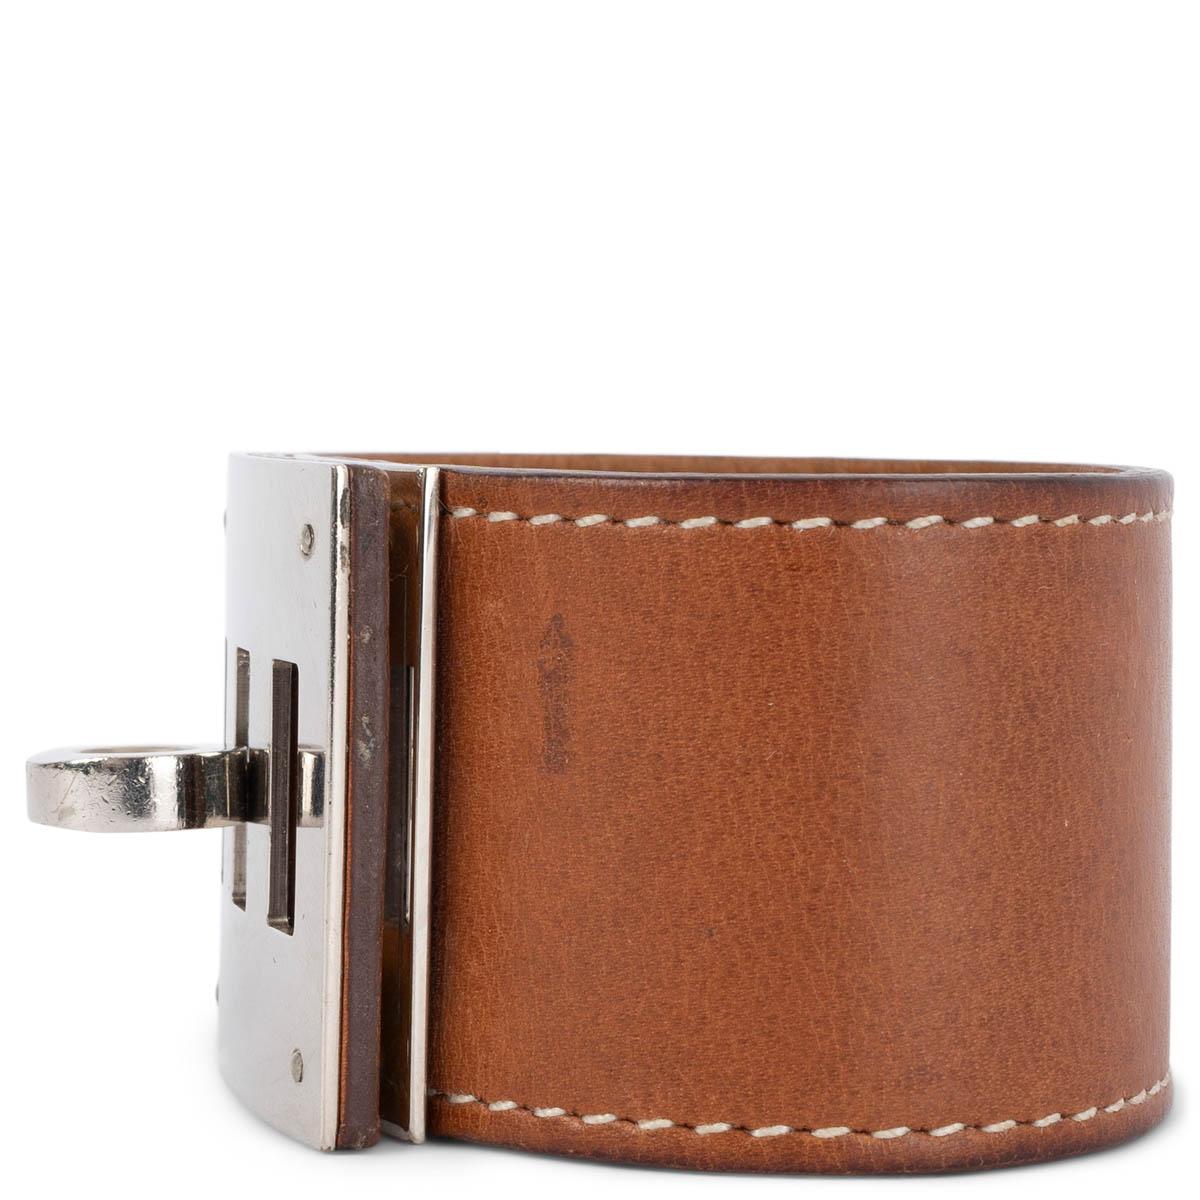 100% authentic Hermès Kelly Dog cuff bracelet in Fauve (cognac) Veau Barenia leather featuring contrasting white stitching and Palladium hardware. Has been worn and shows overall a natural patina to the leather and fine scratches to the